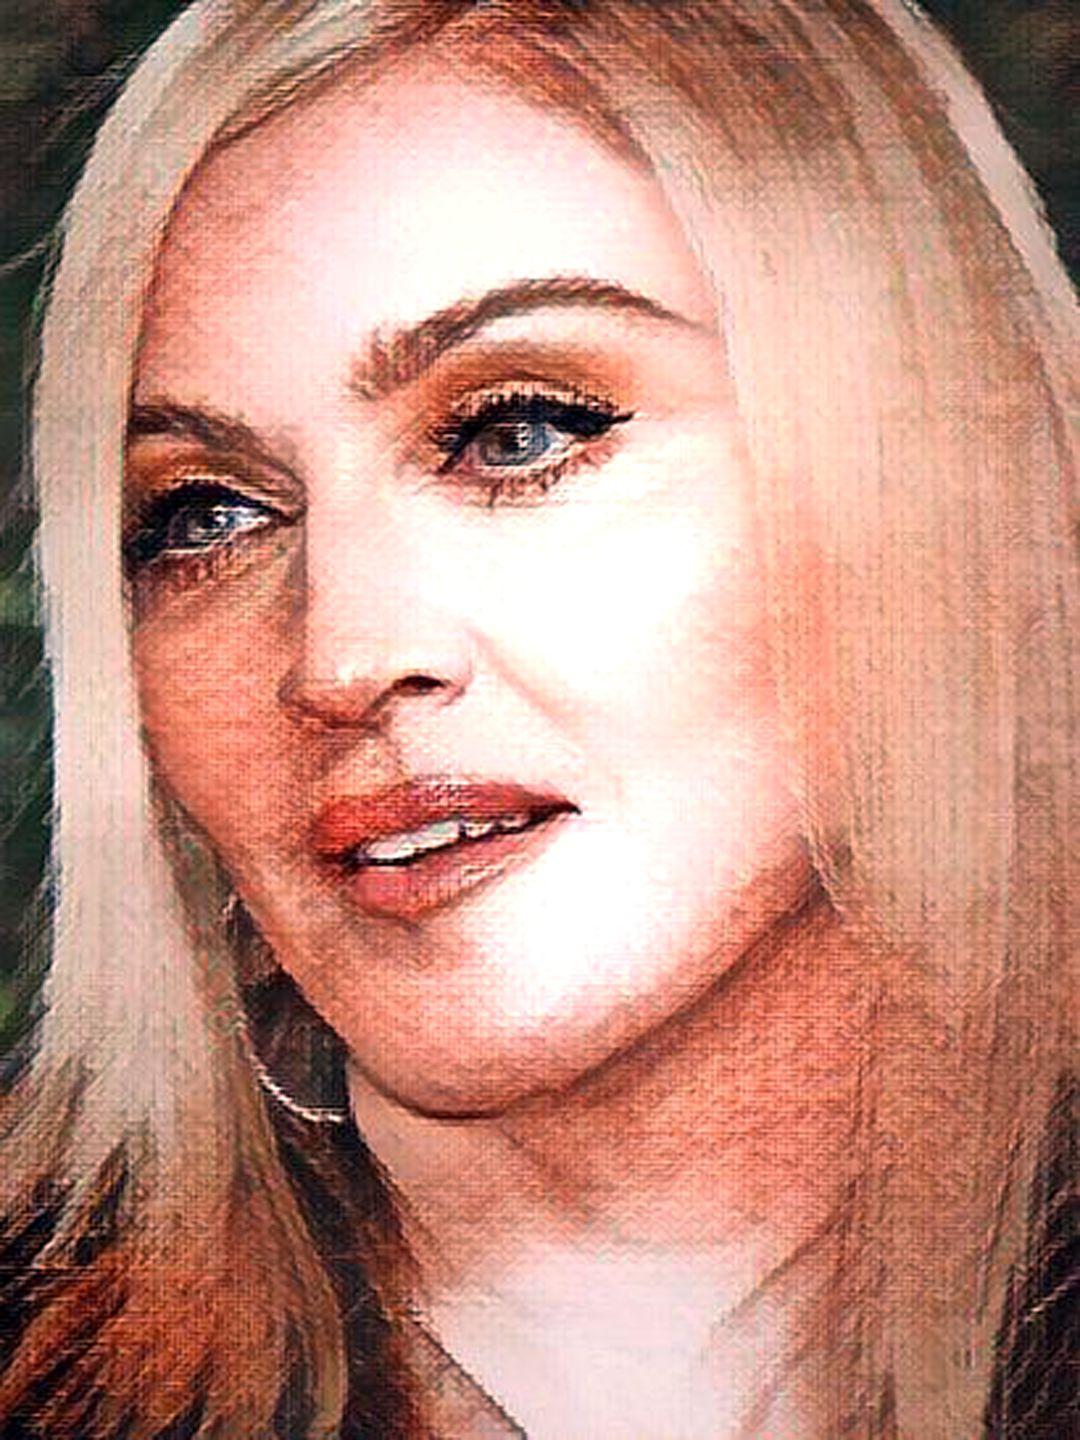 Amanda Tapping Porn Pussy - Madonna # 36 - Celeb ART - Beautiful Artworks of Celebrities, Footballers,  Politicians and Famous People in World | OpenSea